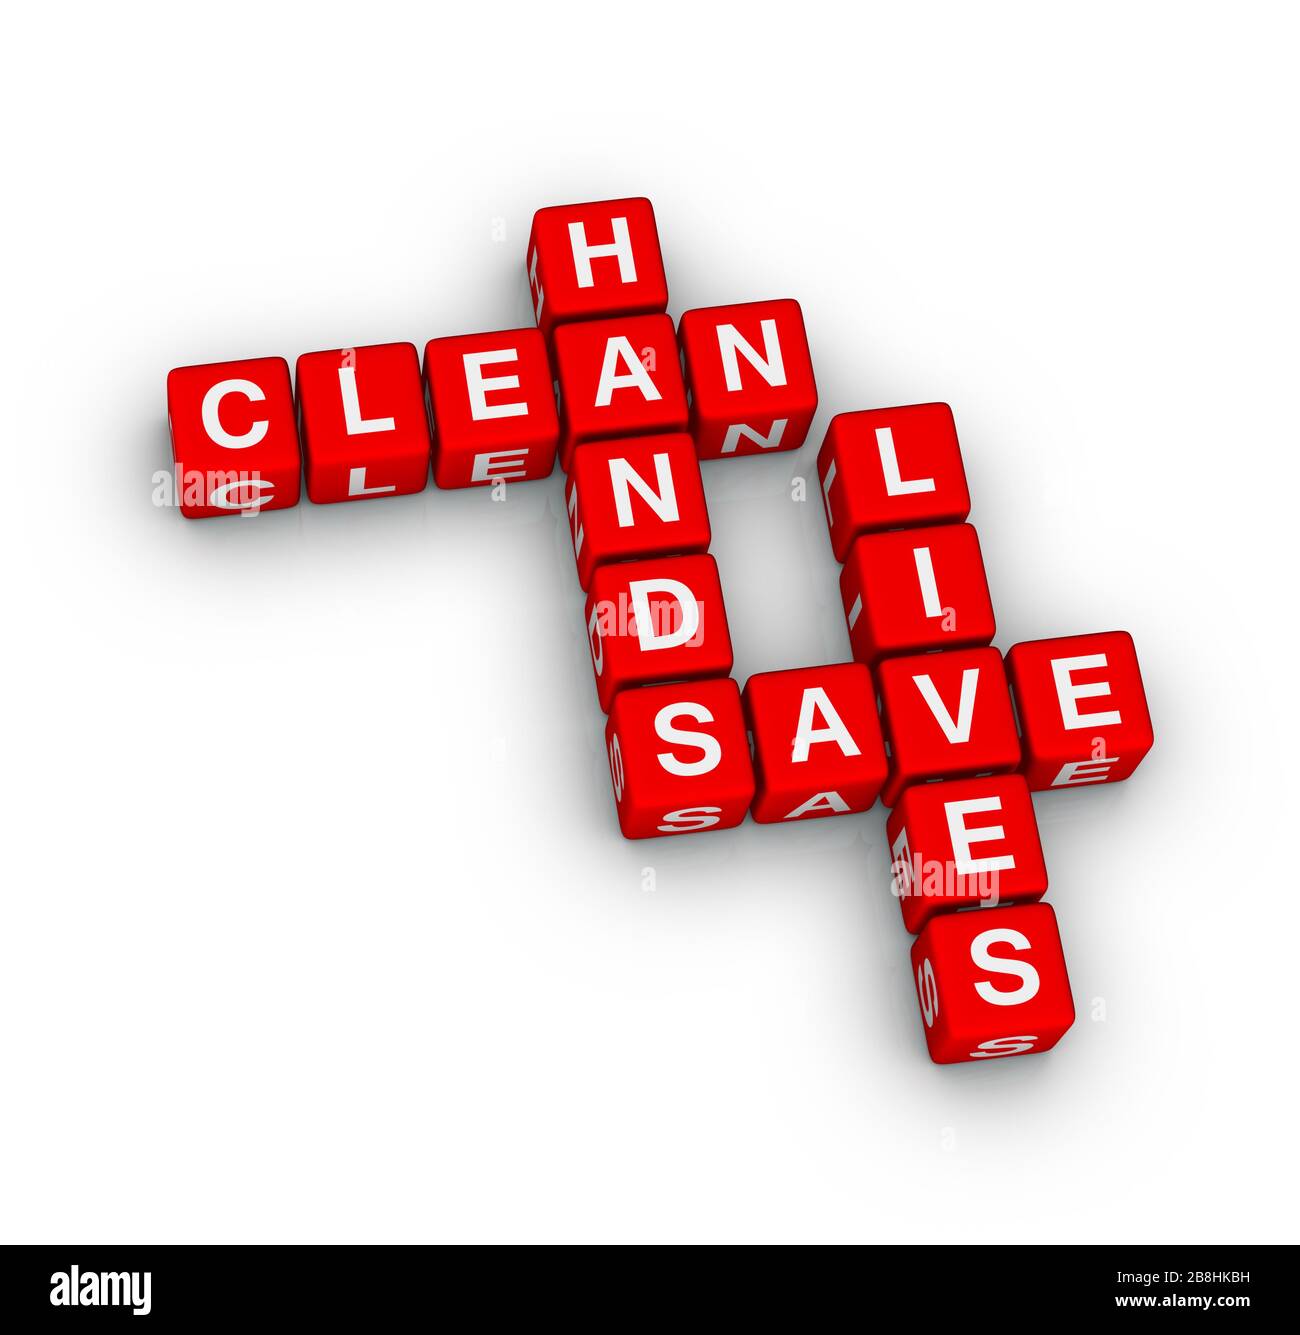 Clean hands save lives 3D crossword puzzle on white background Stock Photo